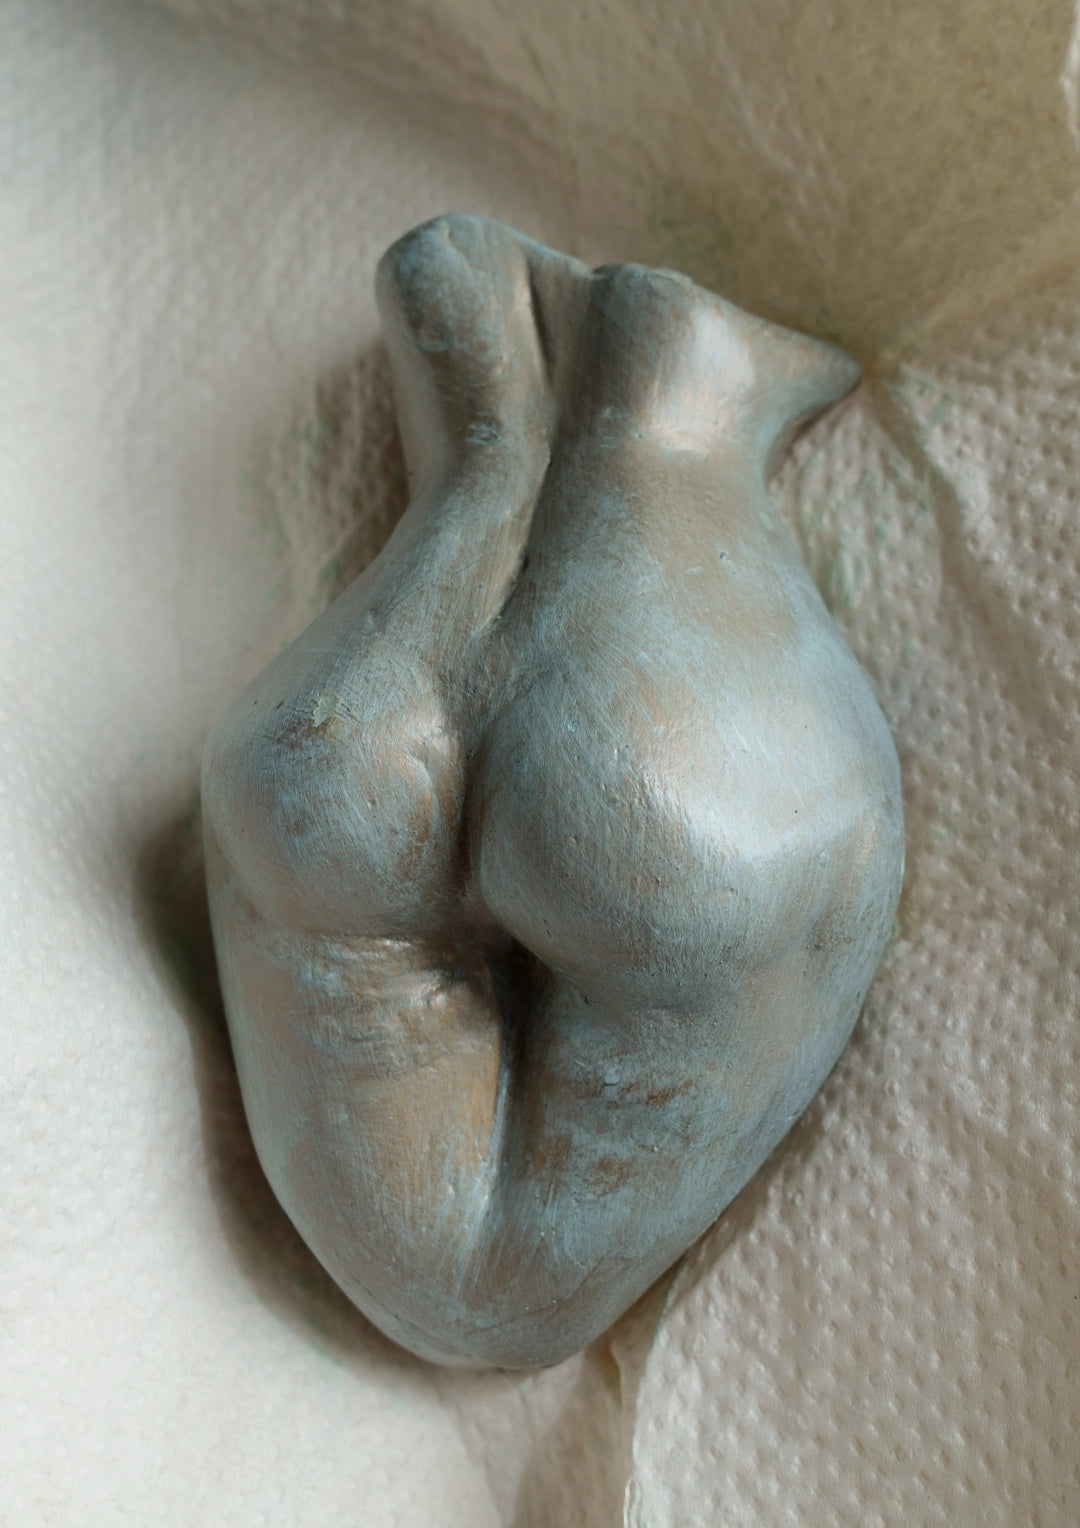 "Butt Sculptures - Painting Plaster Figurines" Workshop - in Cologne, Germany